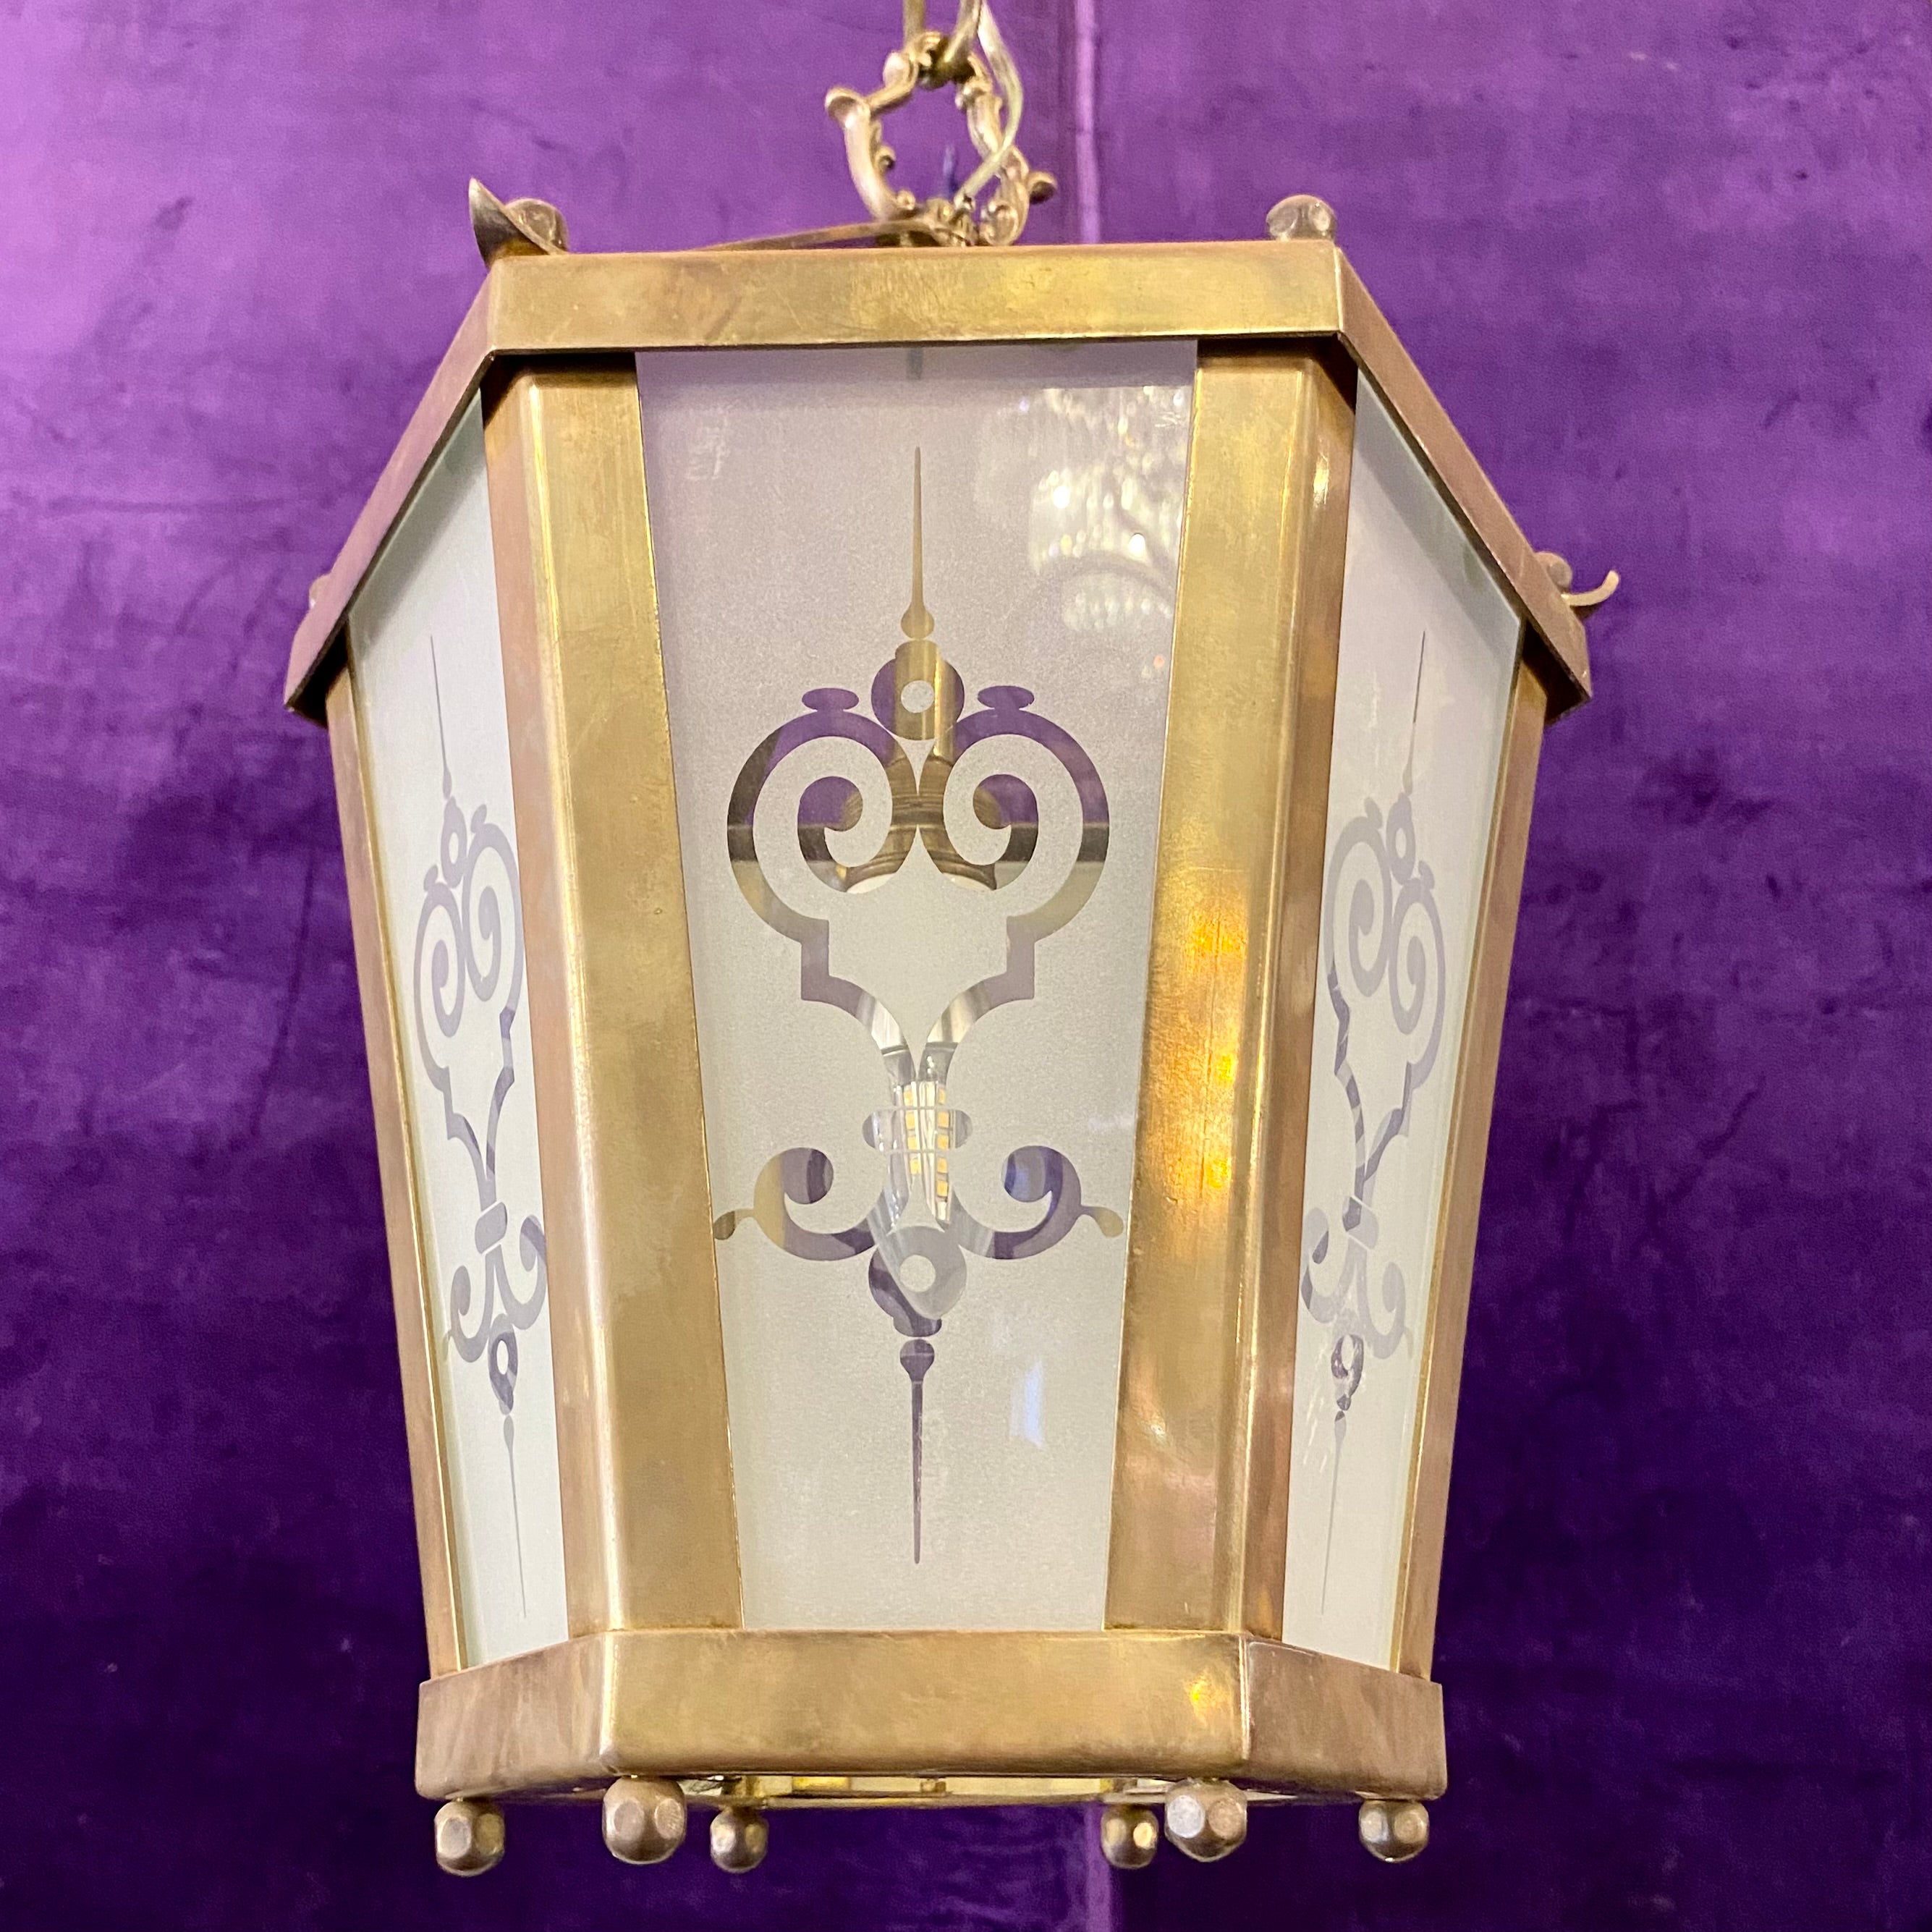 Aged Brass Lantern with Frosted, Etched Glass